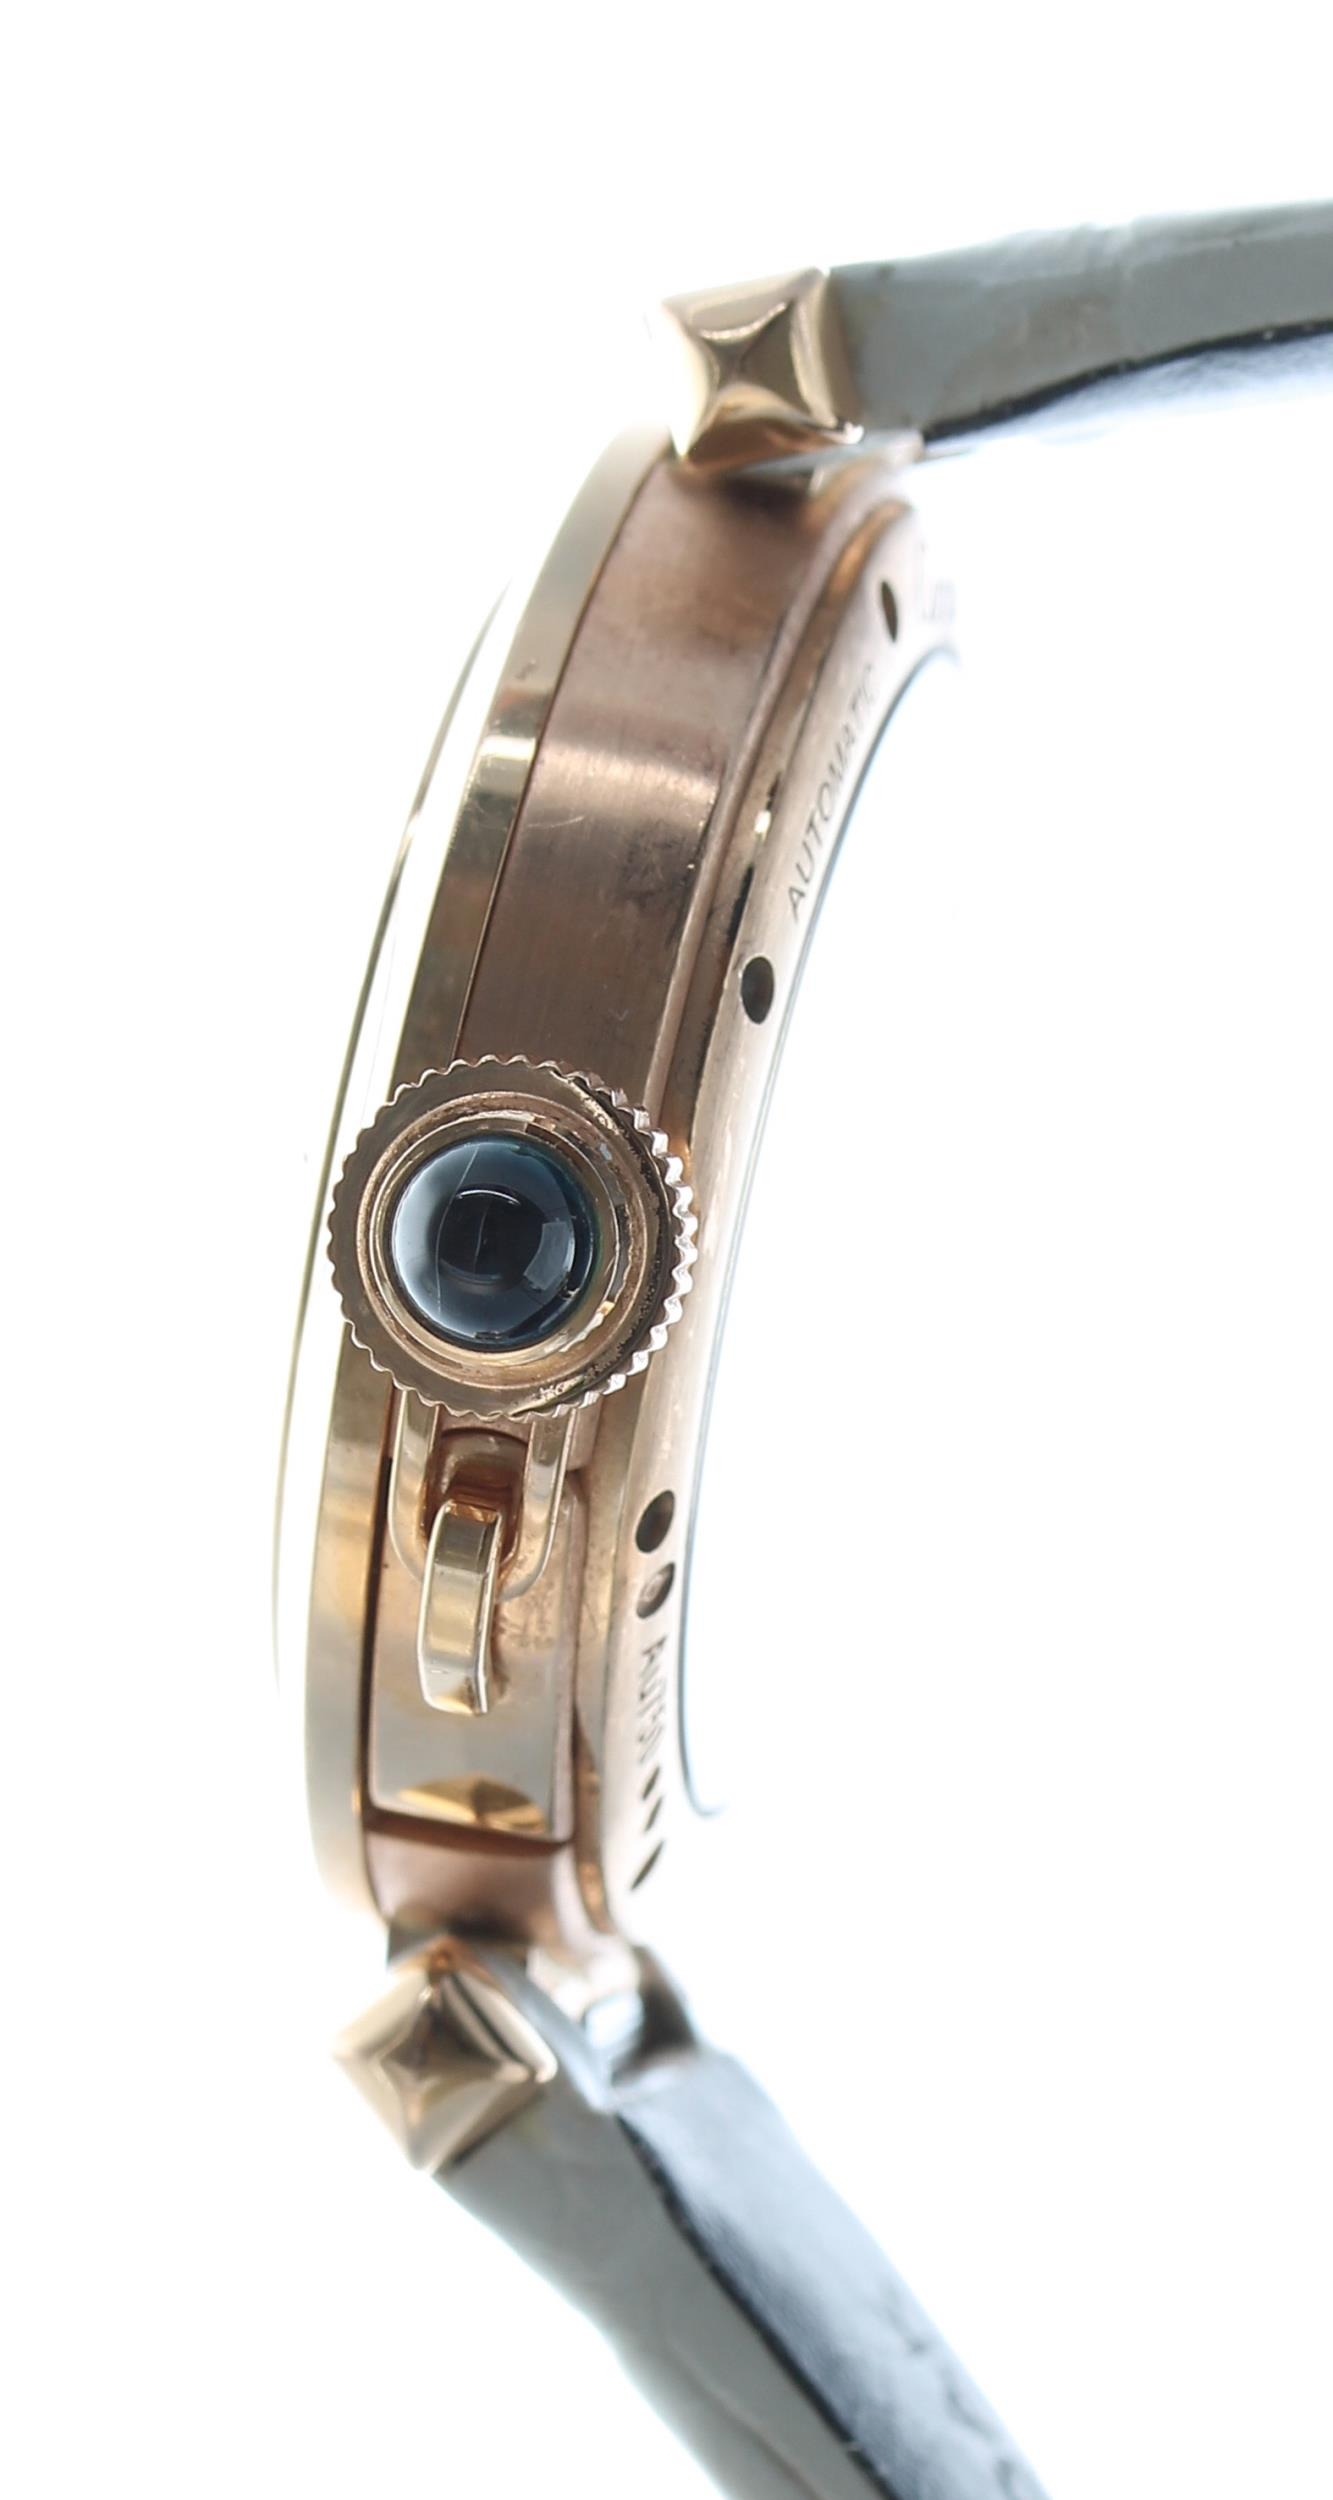 Cartier Pasha 18ct rose gold automatic wristwatch, reference no. 4326, serial no. 22385xxx, silvered - Image 2 of 4